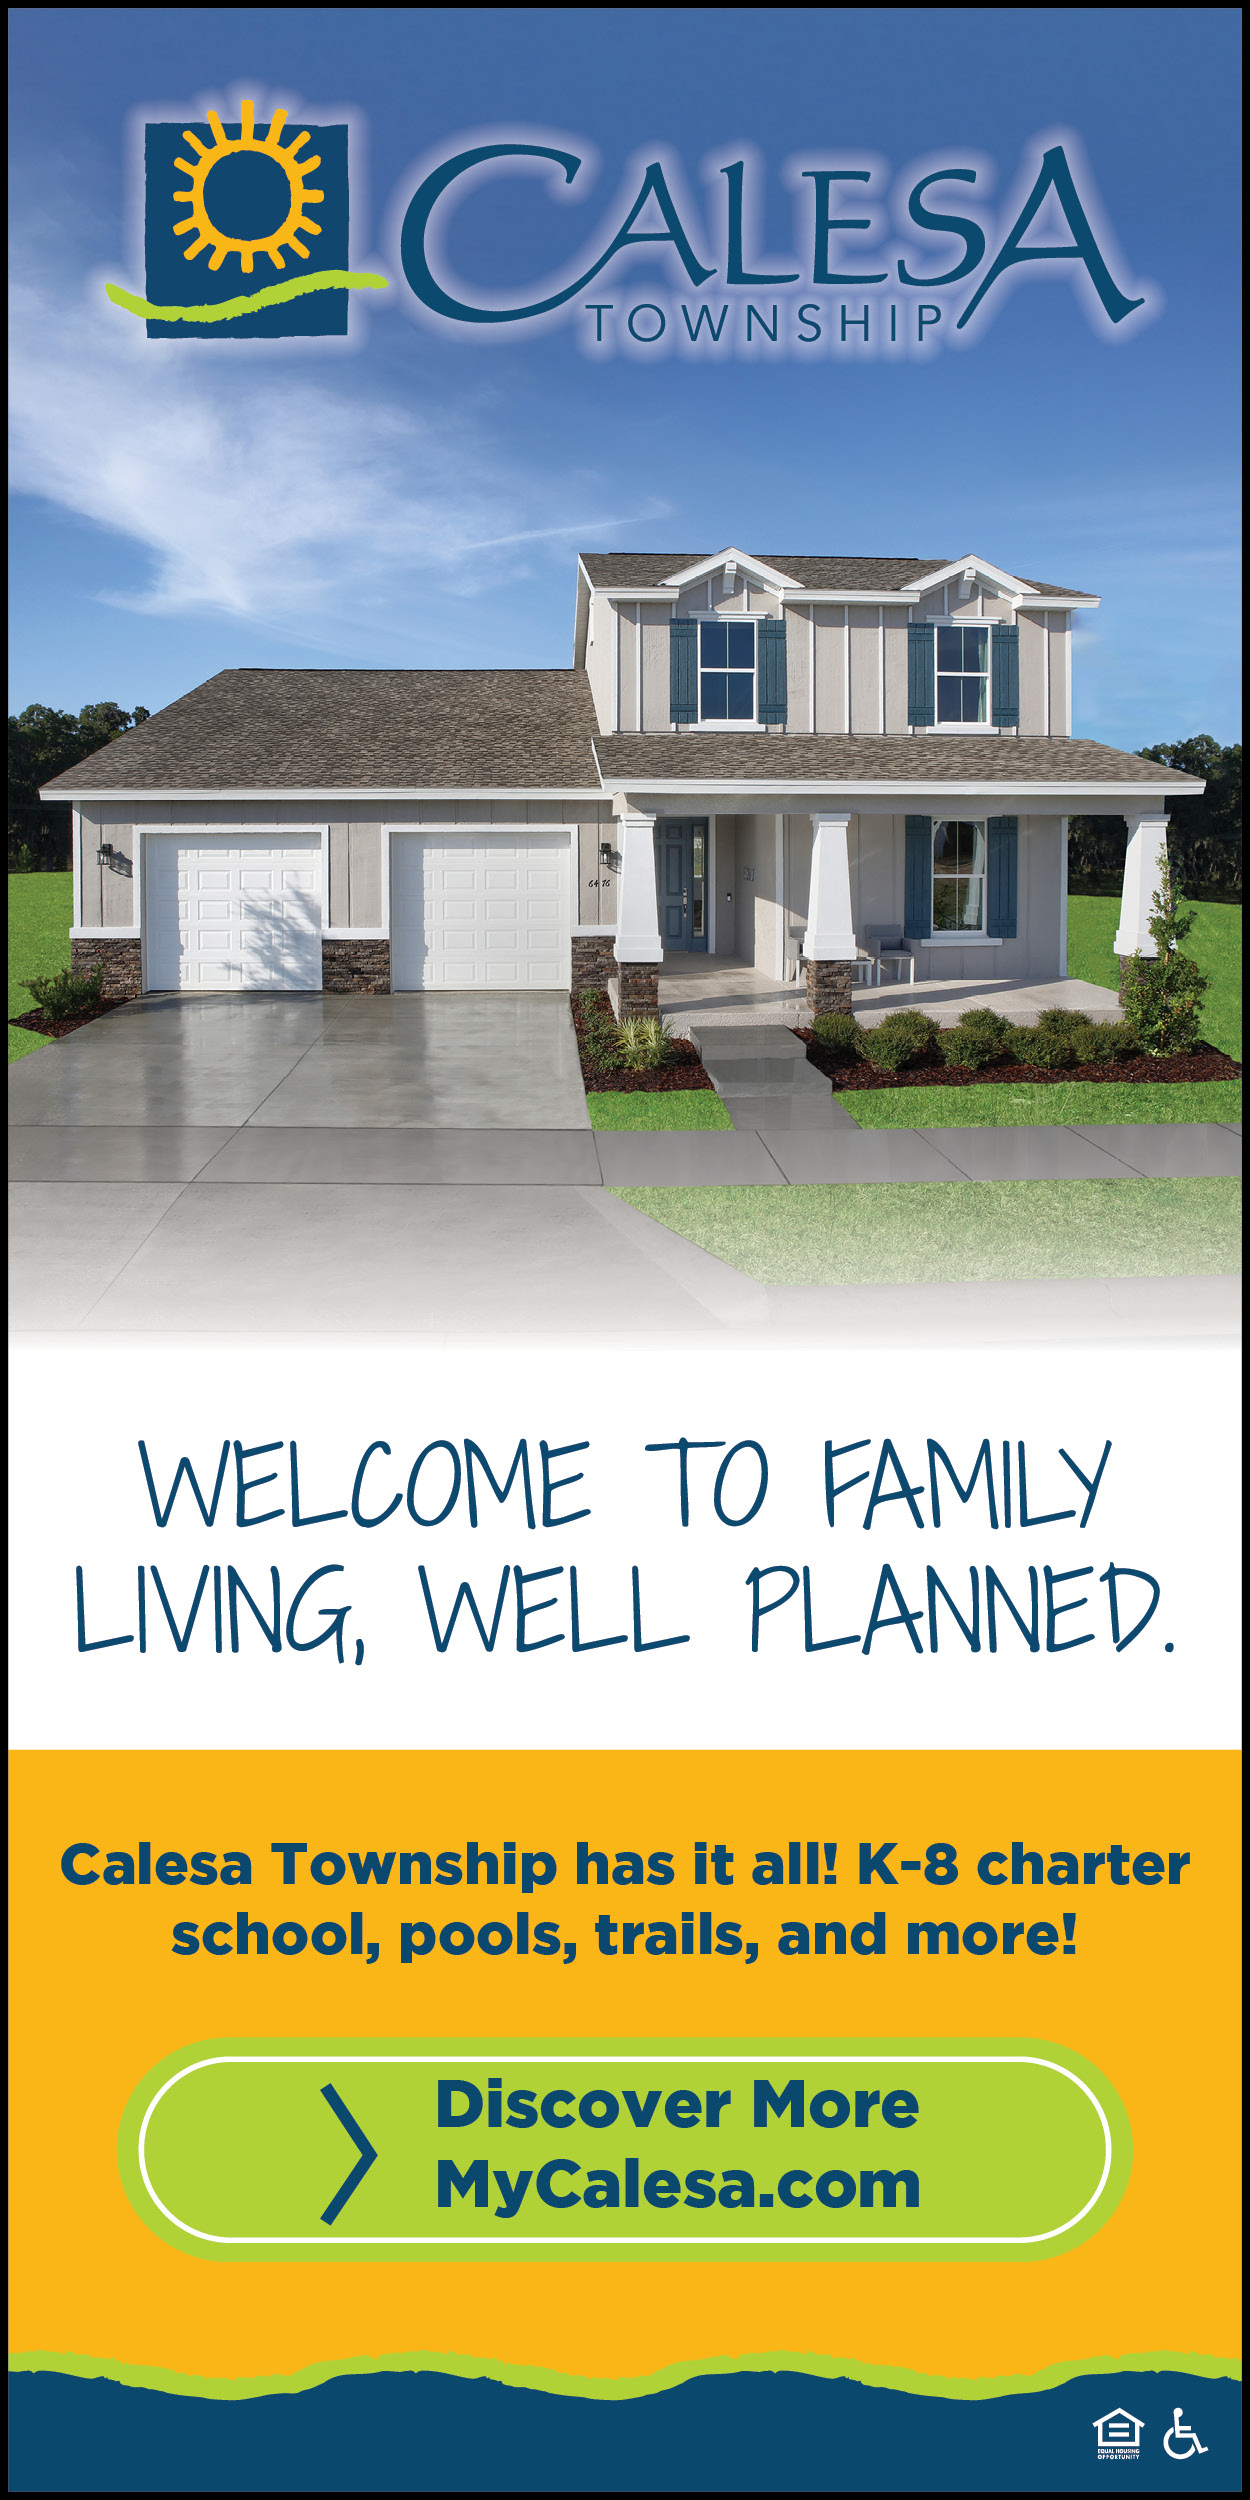 Calesa Township: Welcome to Family Living, Well Planned